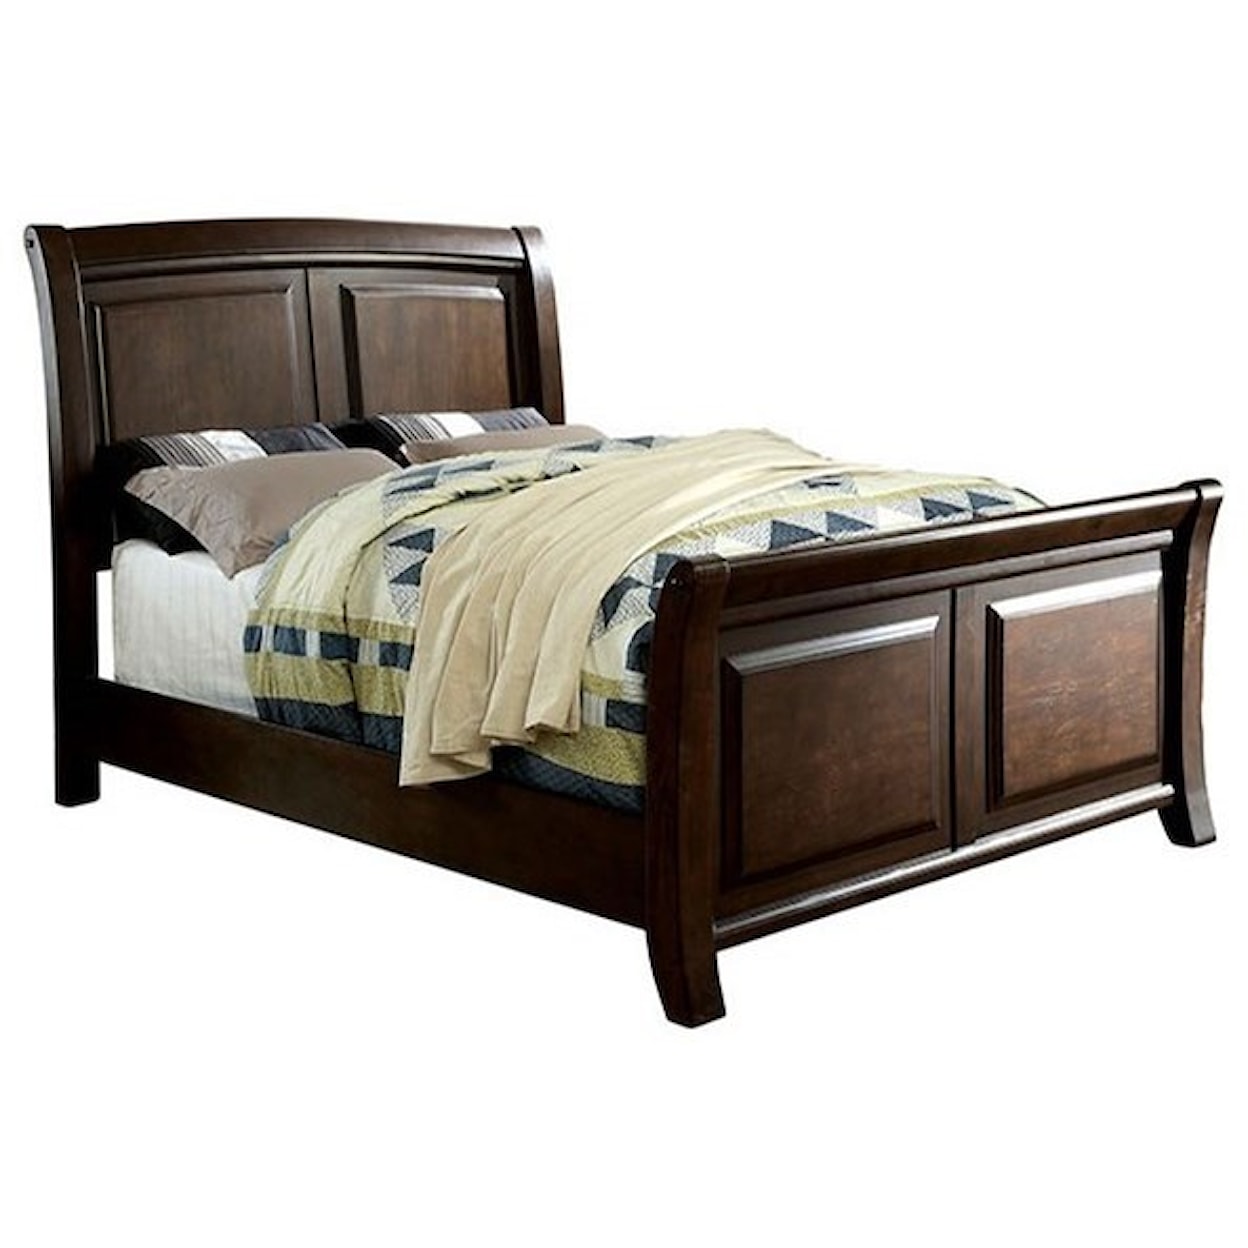 Furniture of America Litchville Cal King Sleigh Bed